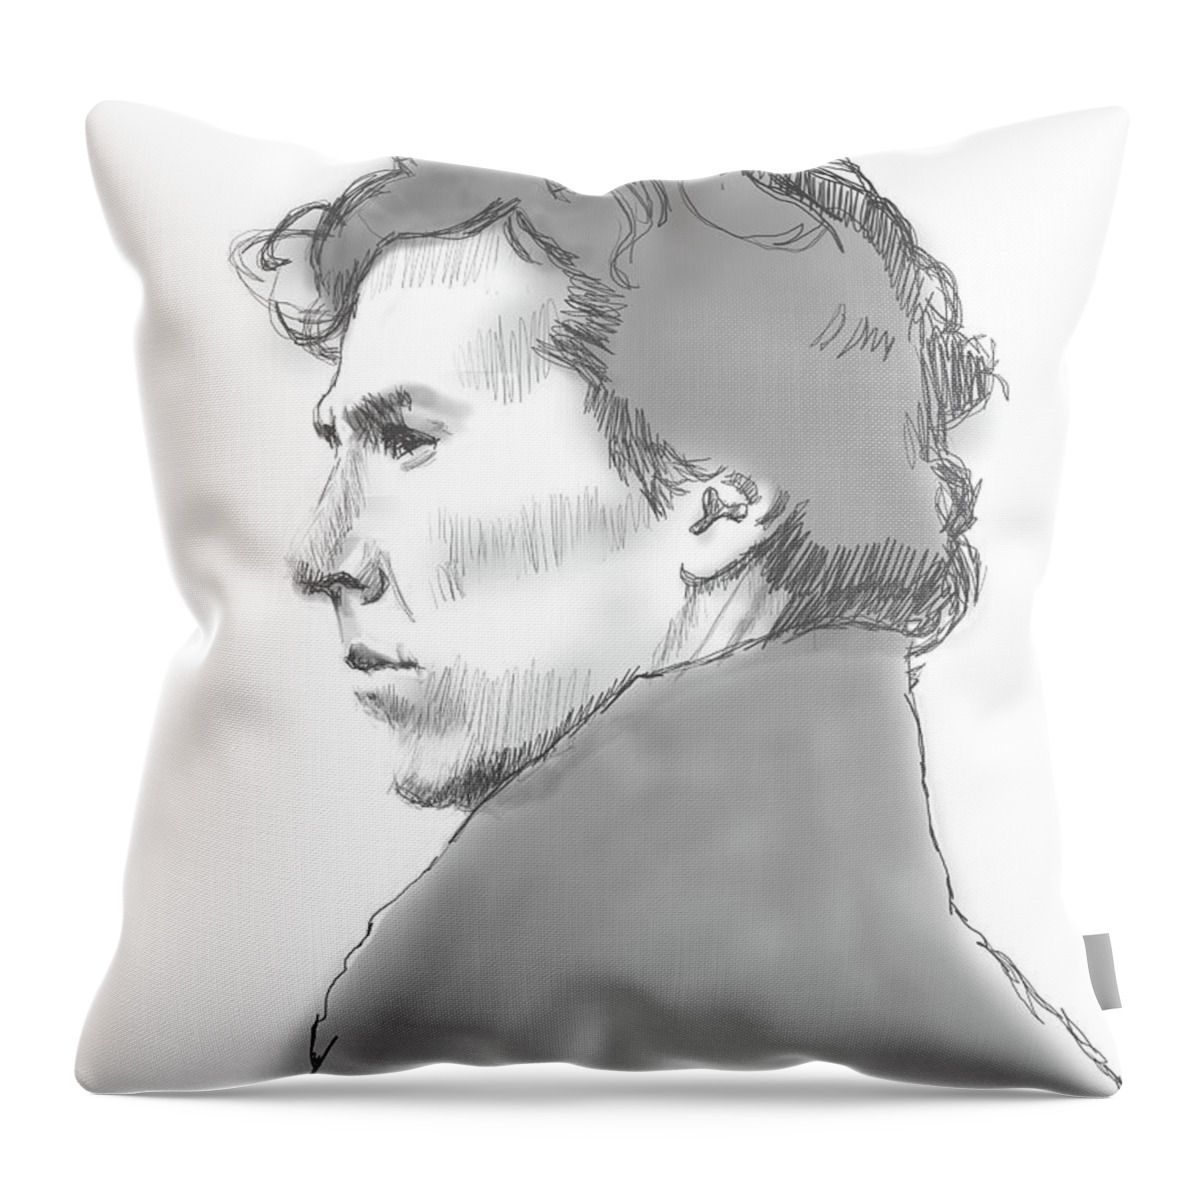 Profile Throw Pillow featuring the digital art High Functioning by Robert Bissett